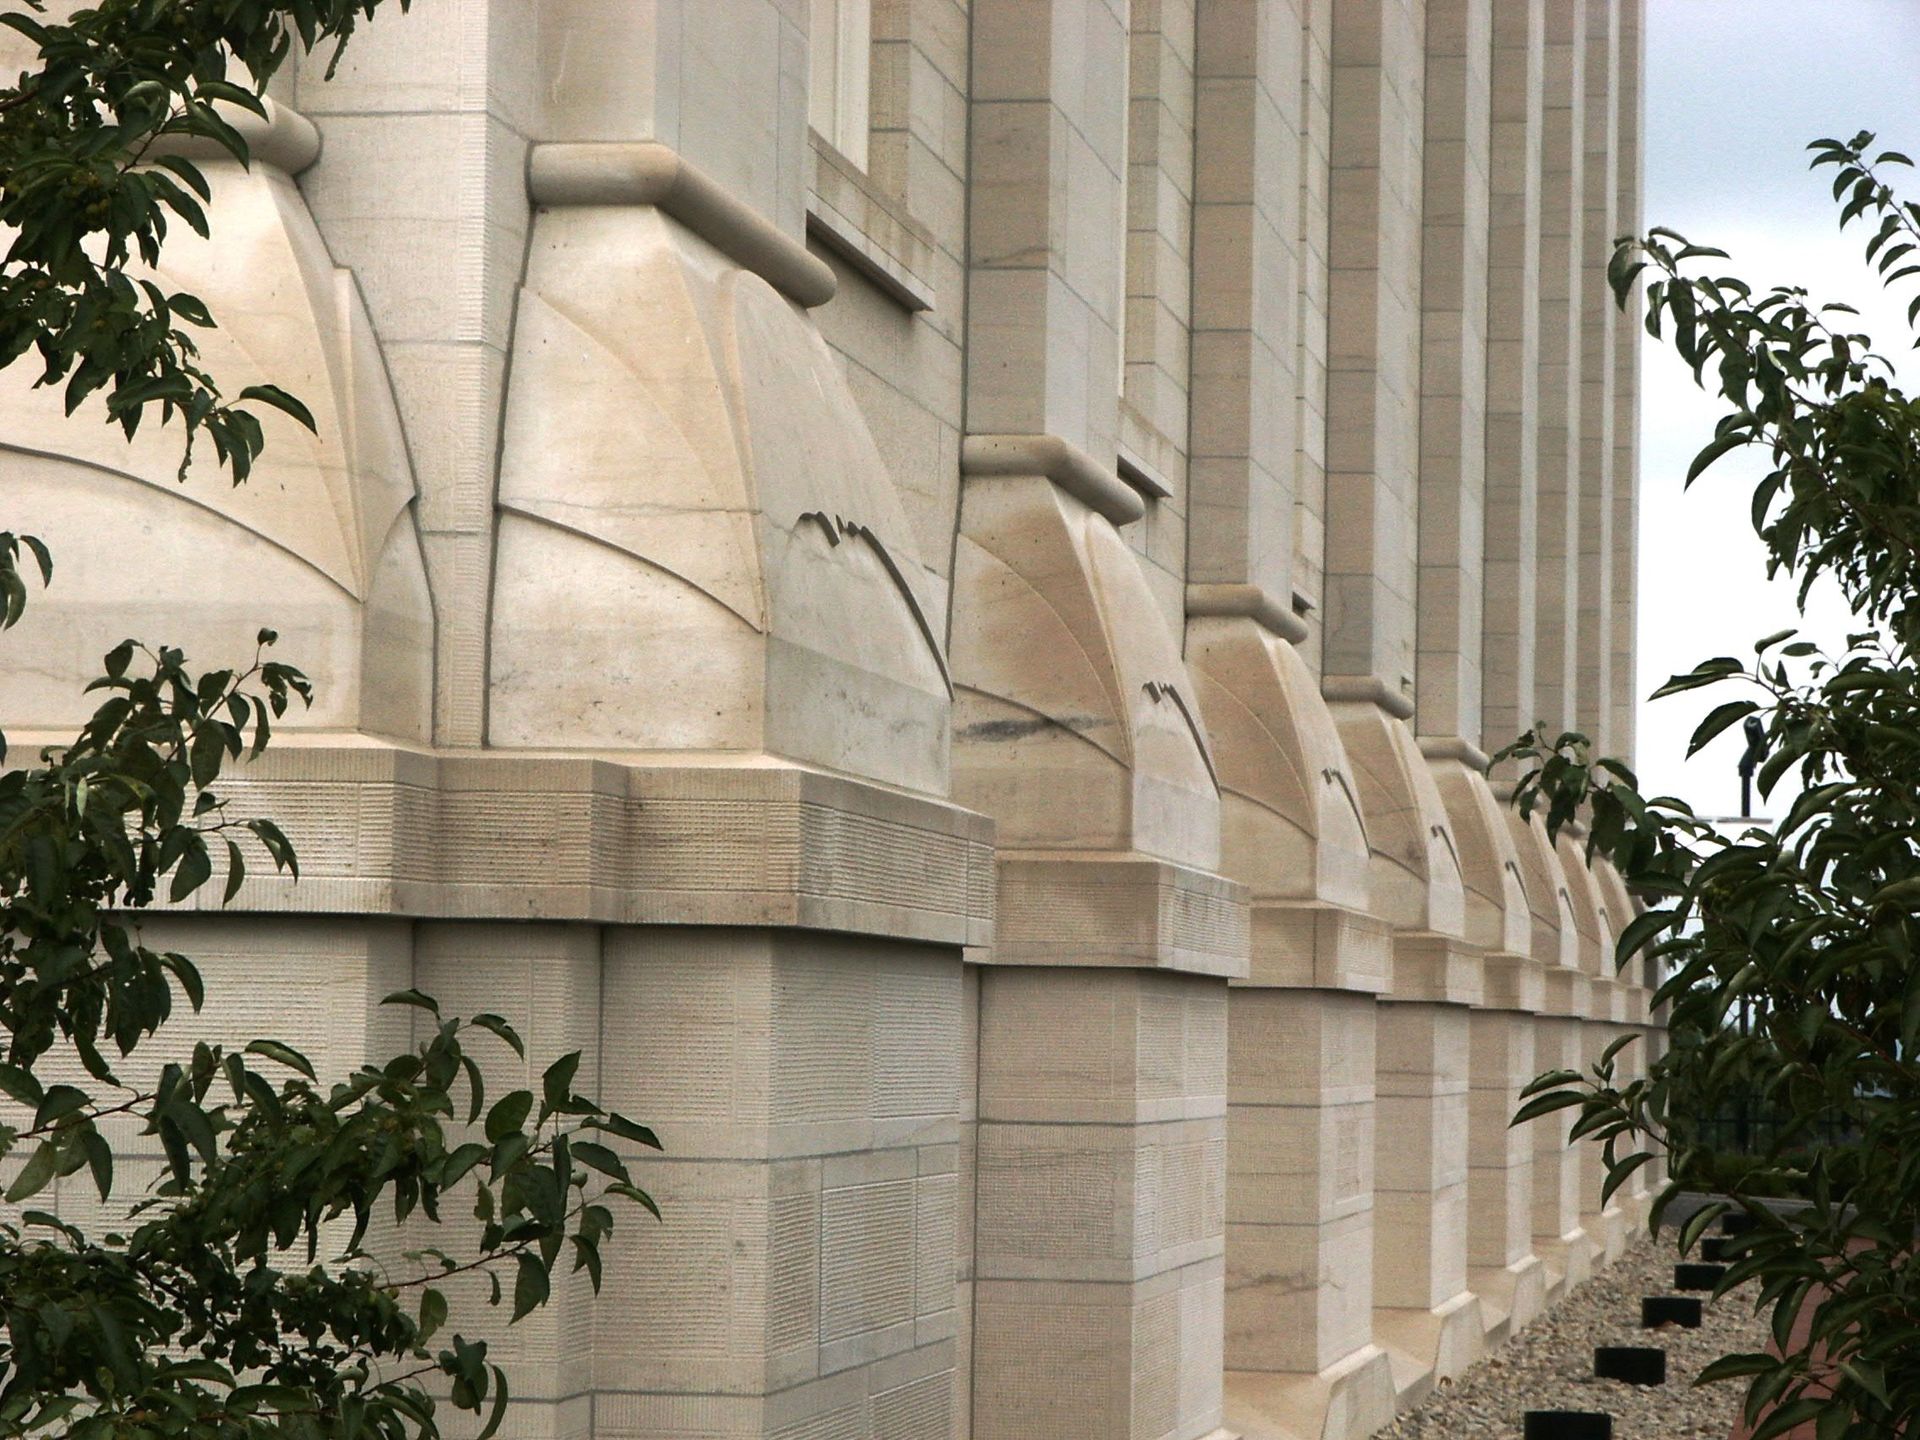 The exterior of the Nauvoo Illinois Temple, with scenery.